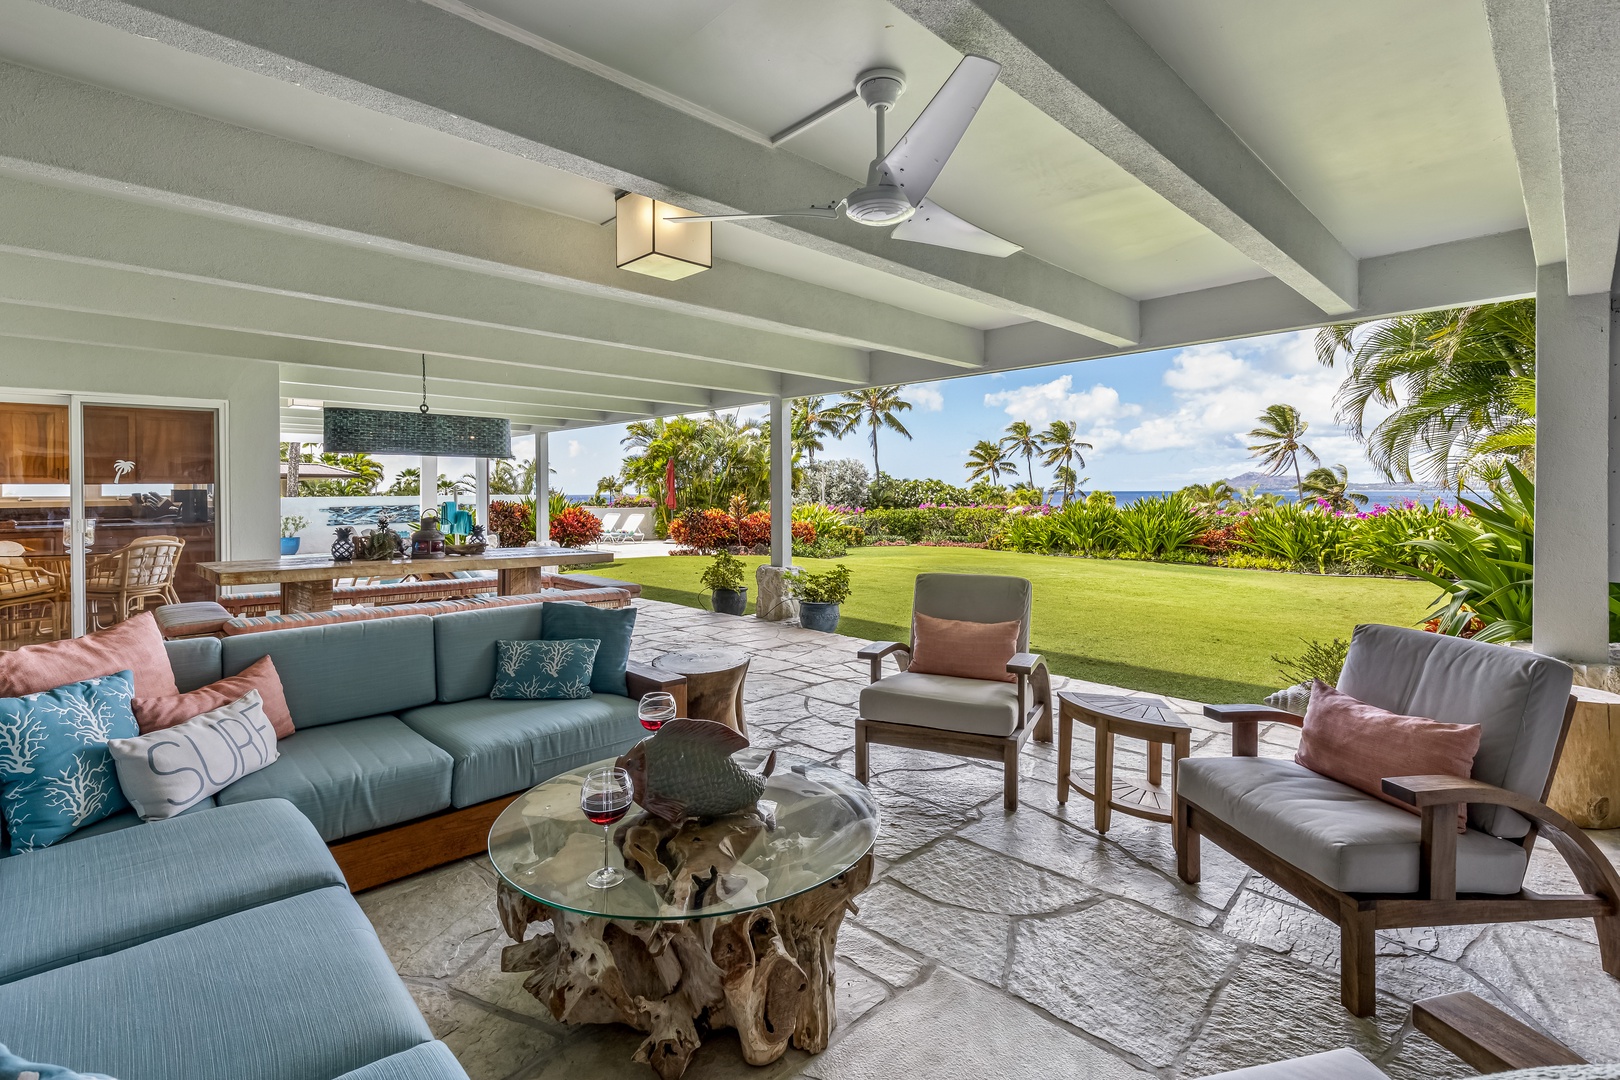 Honolulu Vacation Rentals, Hale Ola - A Private Lanai is the perfect spot to relax